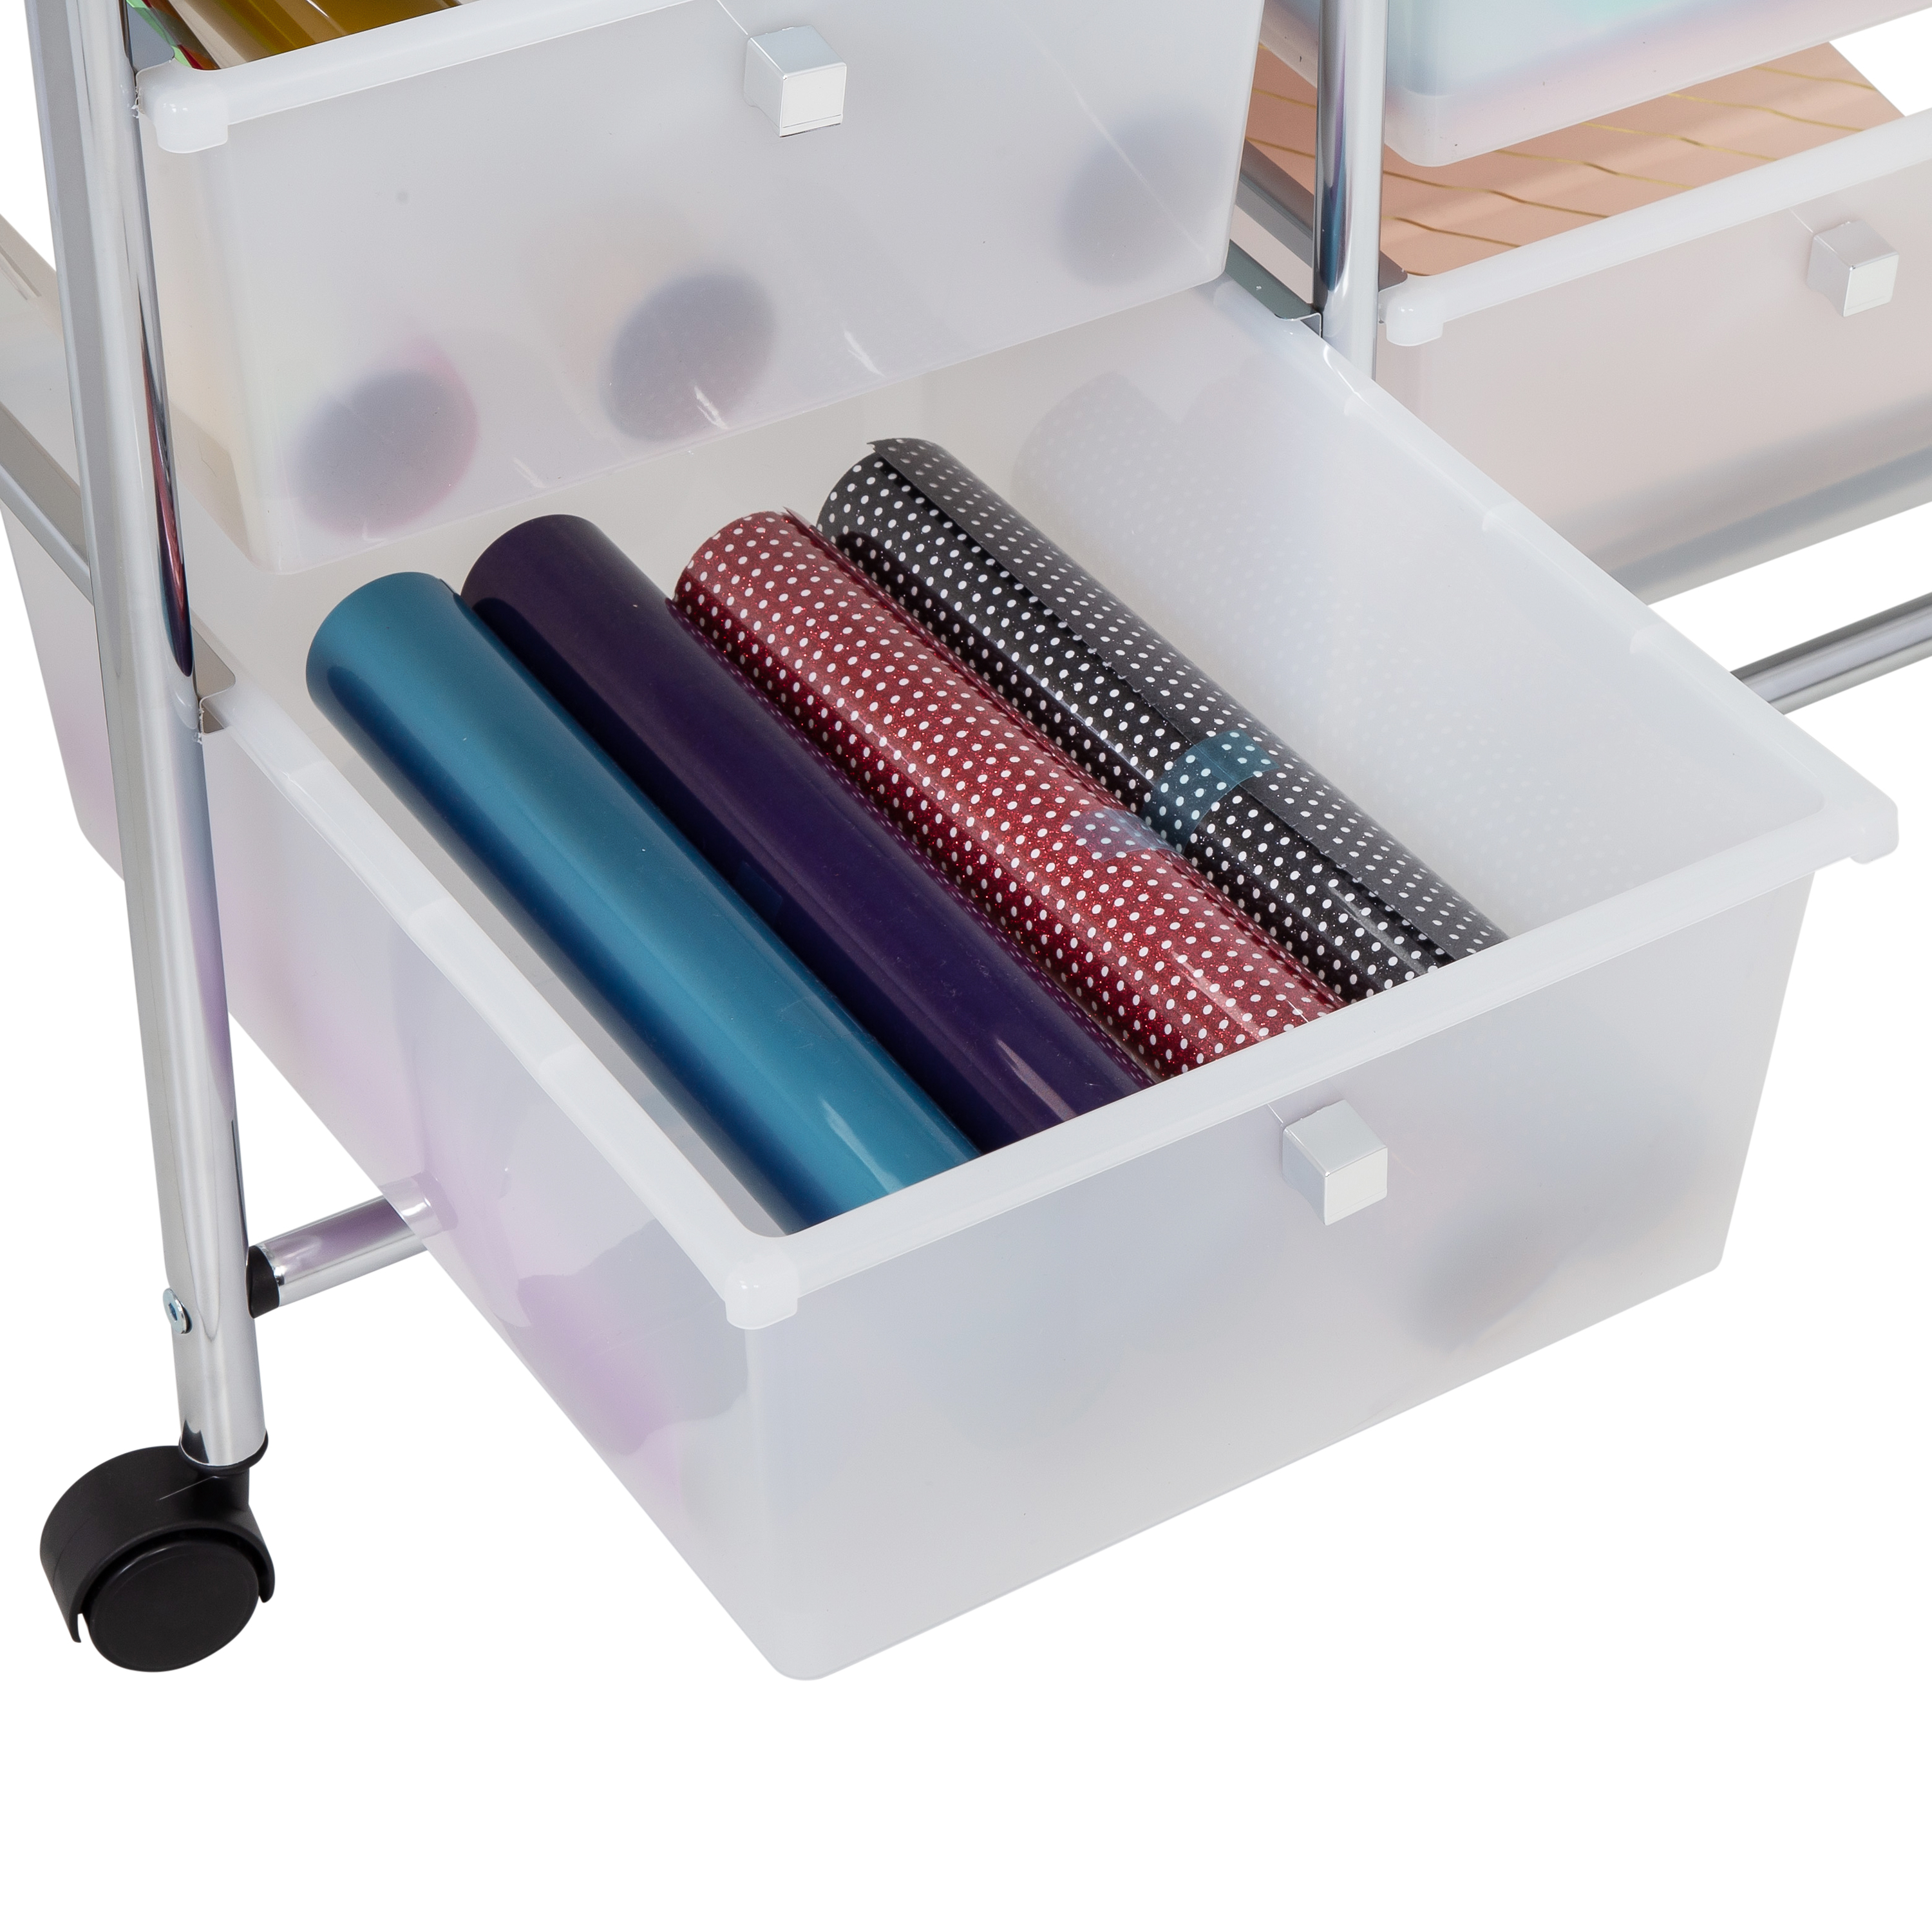 Honey-Can-Do Plastic 12-Drawer Rolling Craft Craft or Office Cart, Clear/Chrome - image 5 of 10